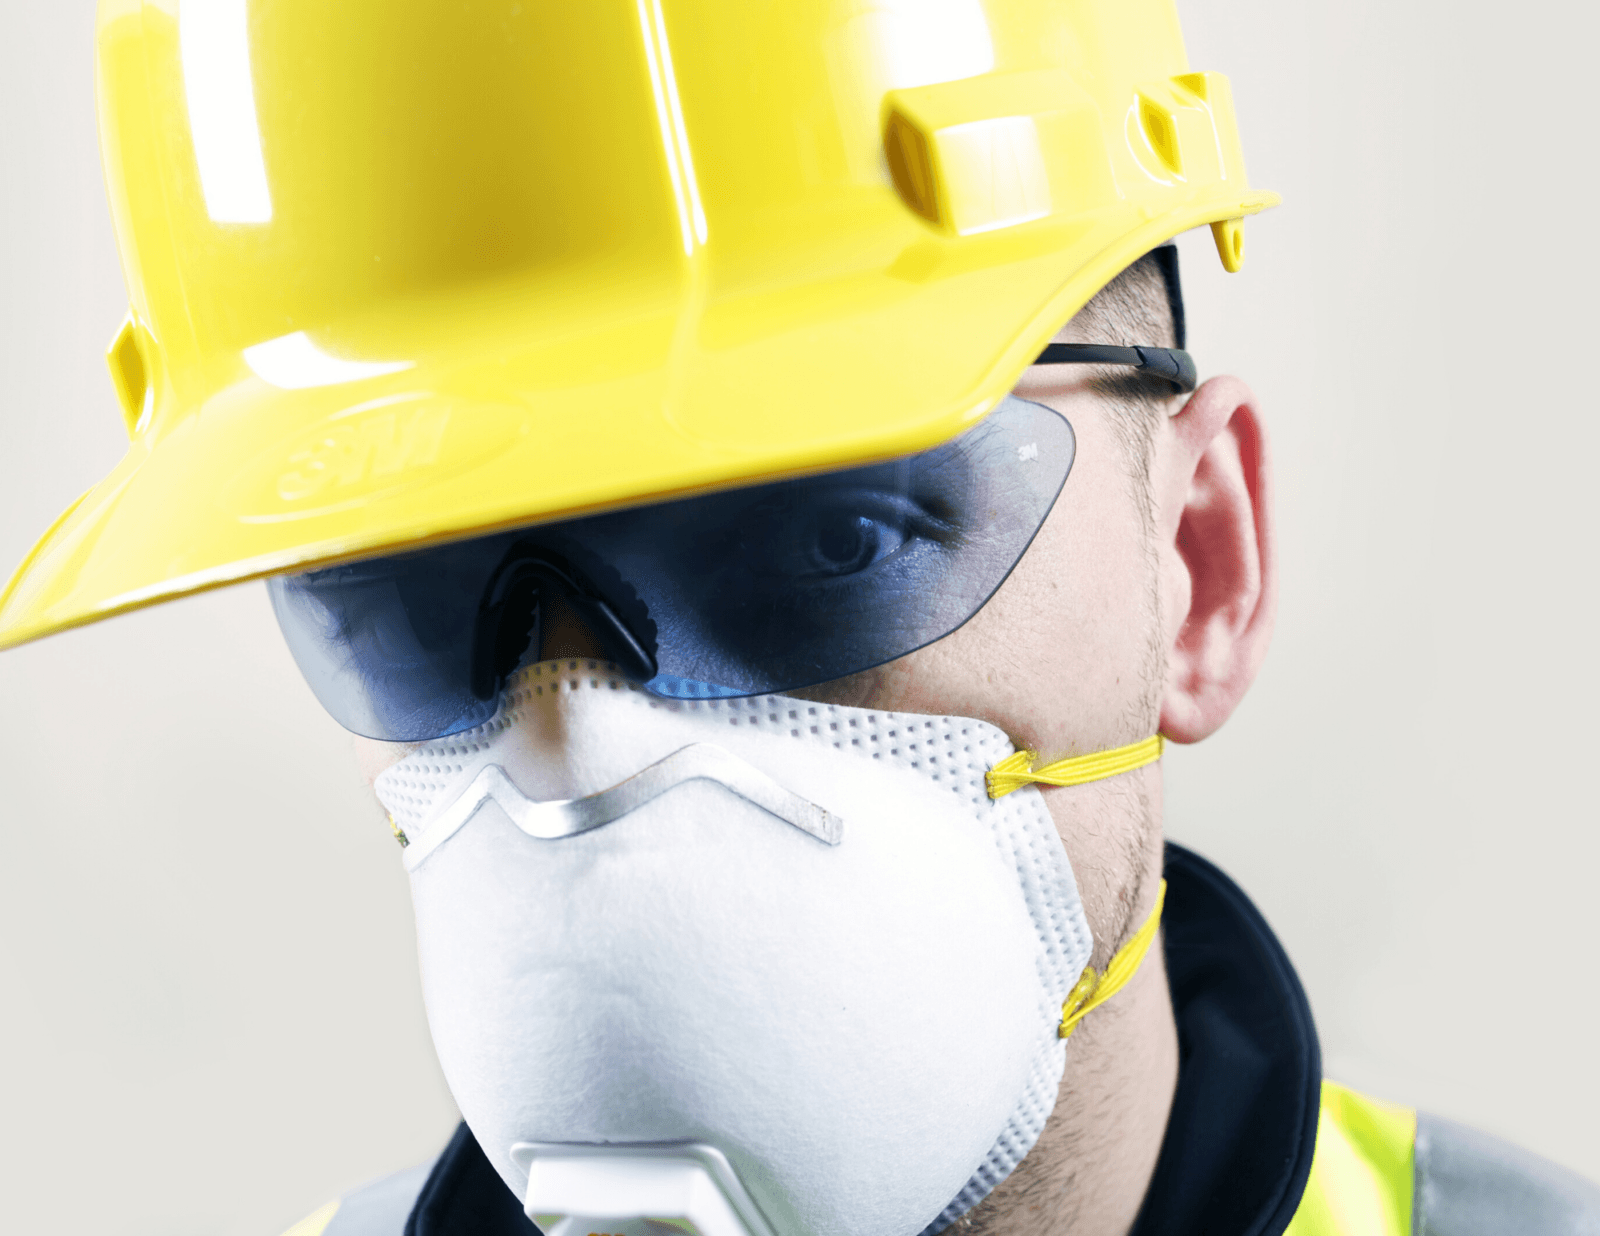 Performance Bonds and Coronavirus. This is a picture of a construction worker with a mask on his face.